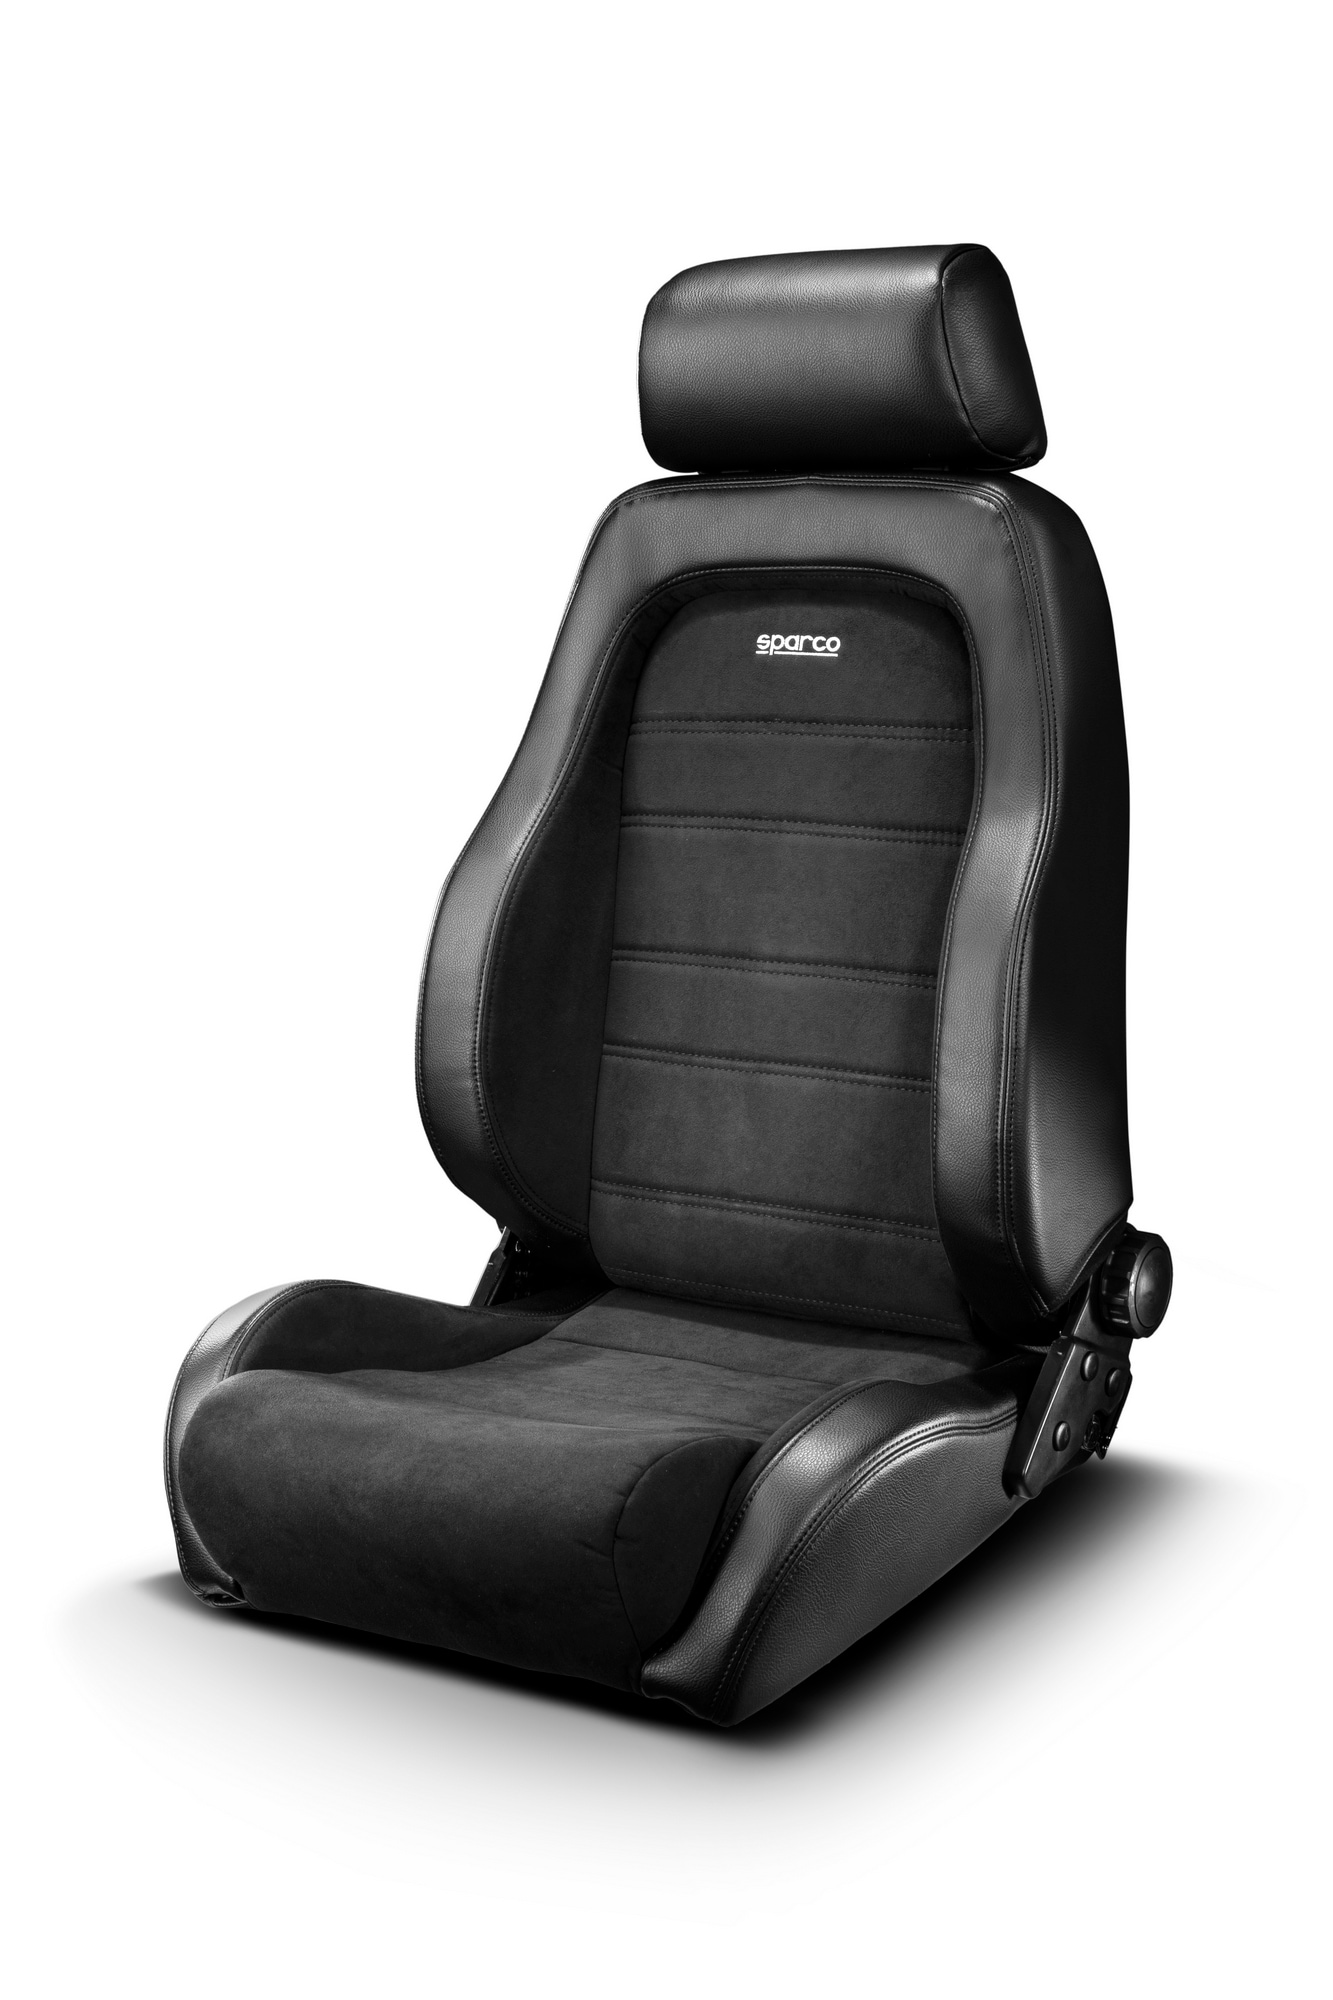 Racing Seat Sparco GT Black | Sparco | Seats & Accessories